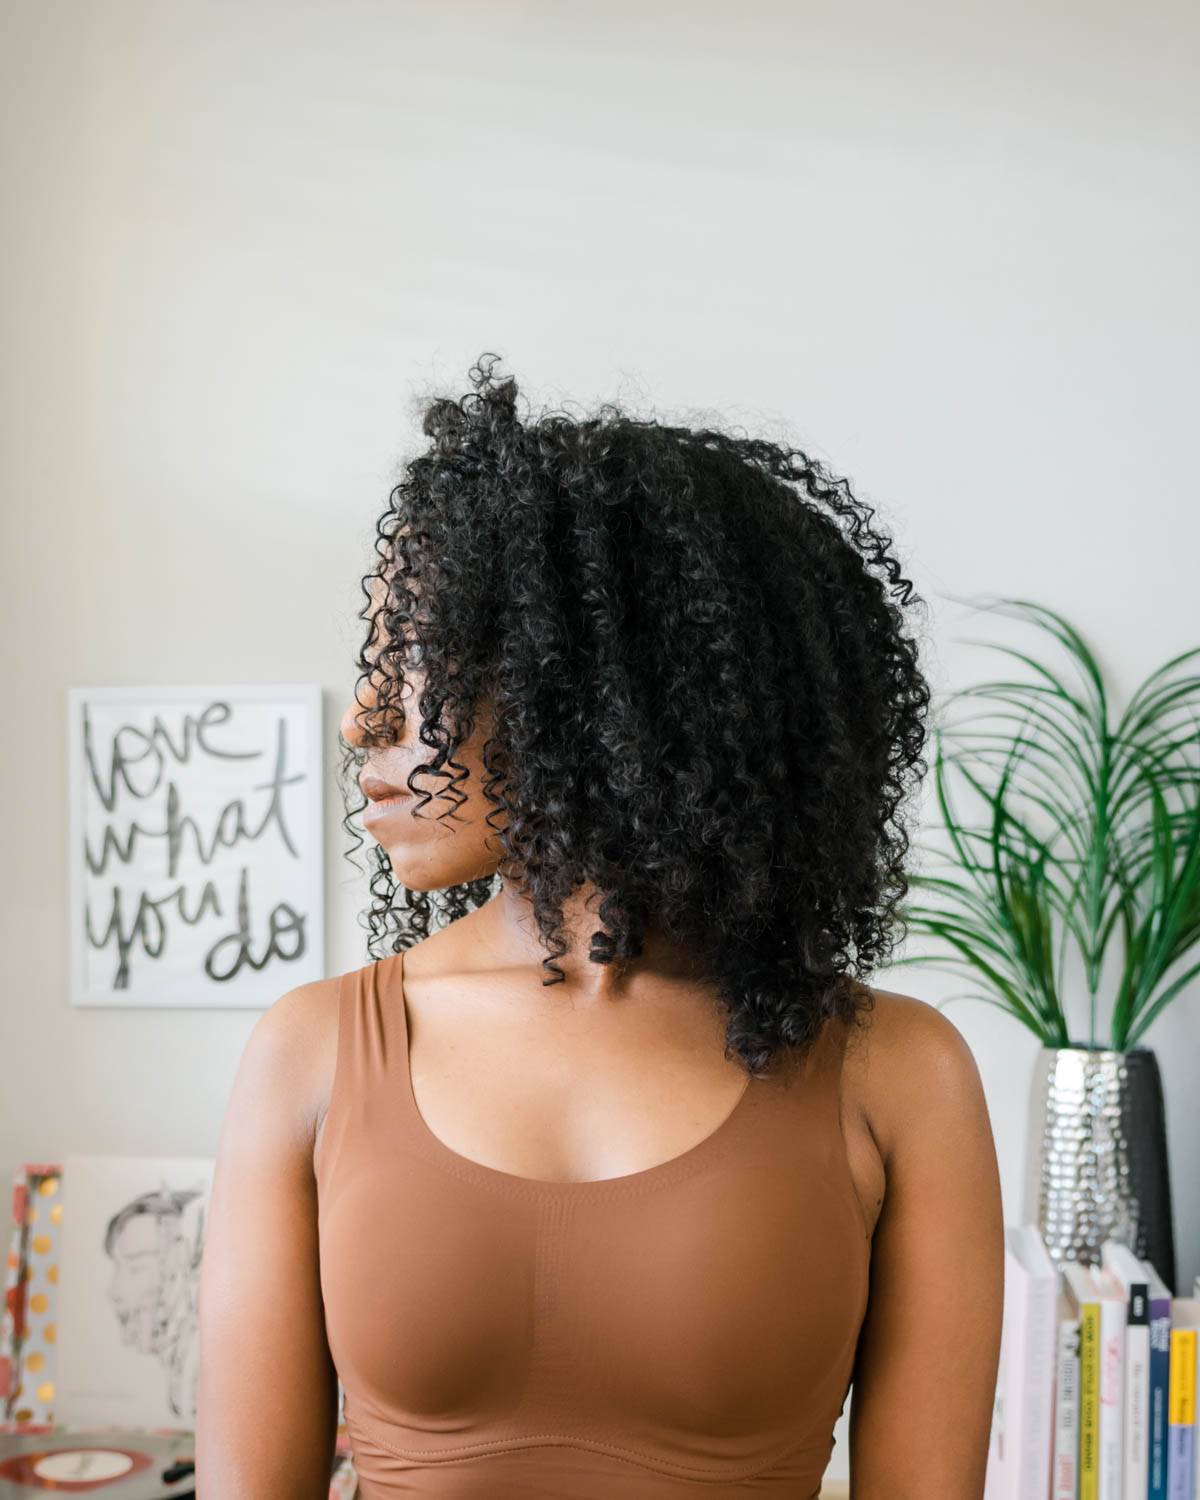 black women-owned businesses